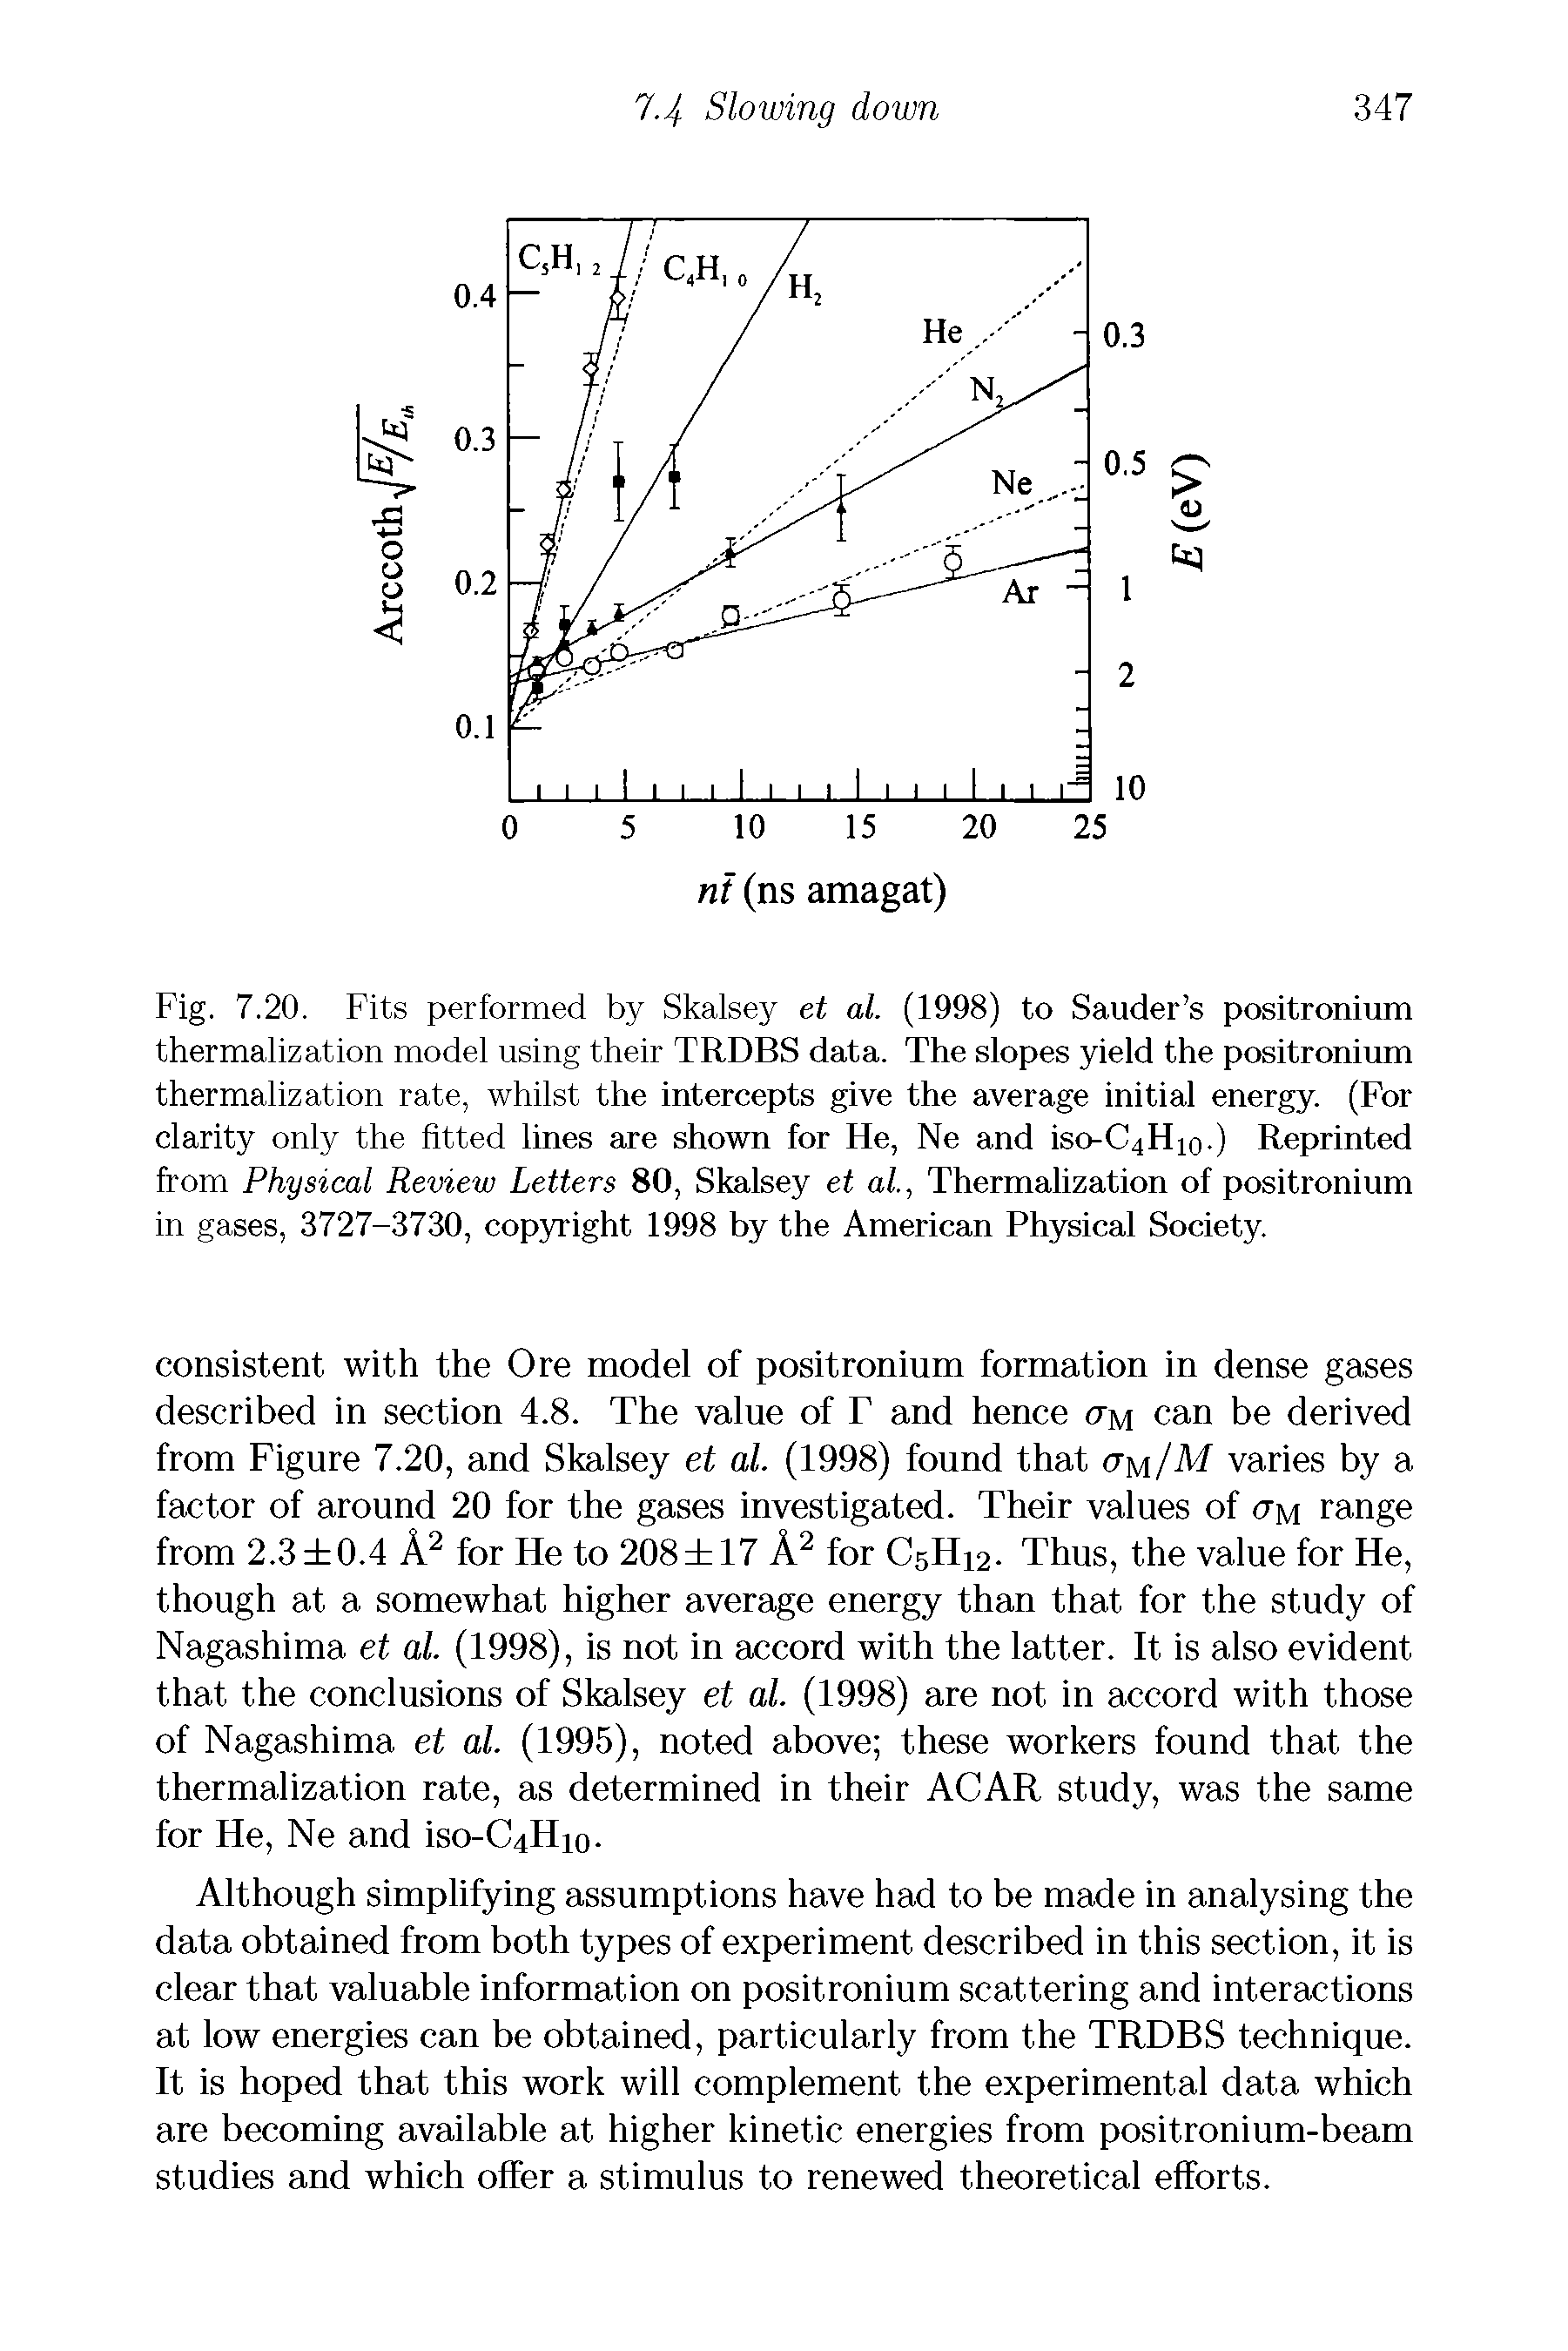 Fig. 7.20. Fits performed by Skalsey et al. (1998) to Sauder s positronium thermalization model using their TRDBS data. The slopes yield the positronium thermalization rate, whilst the intercepts give the average initial energy. (For clarity only the fitted lines are shown for He, Ne and iso-C io-) Reprinted from Physical Review Letters 80, Skalsey et al., Thermalization of positronium in gases, 3727-3730, copyright 1998 by the American Physical Society.